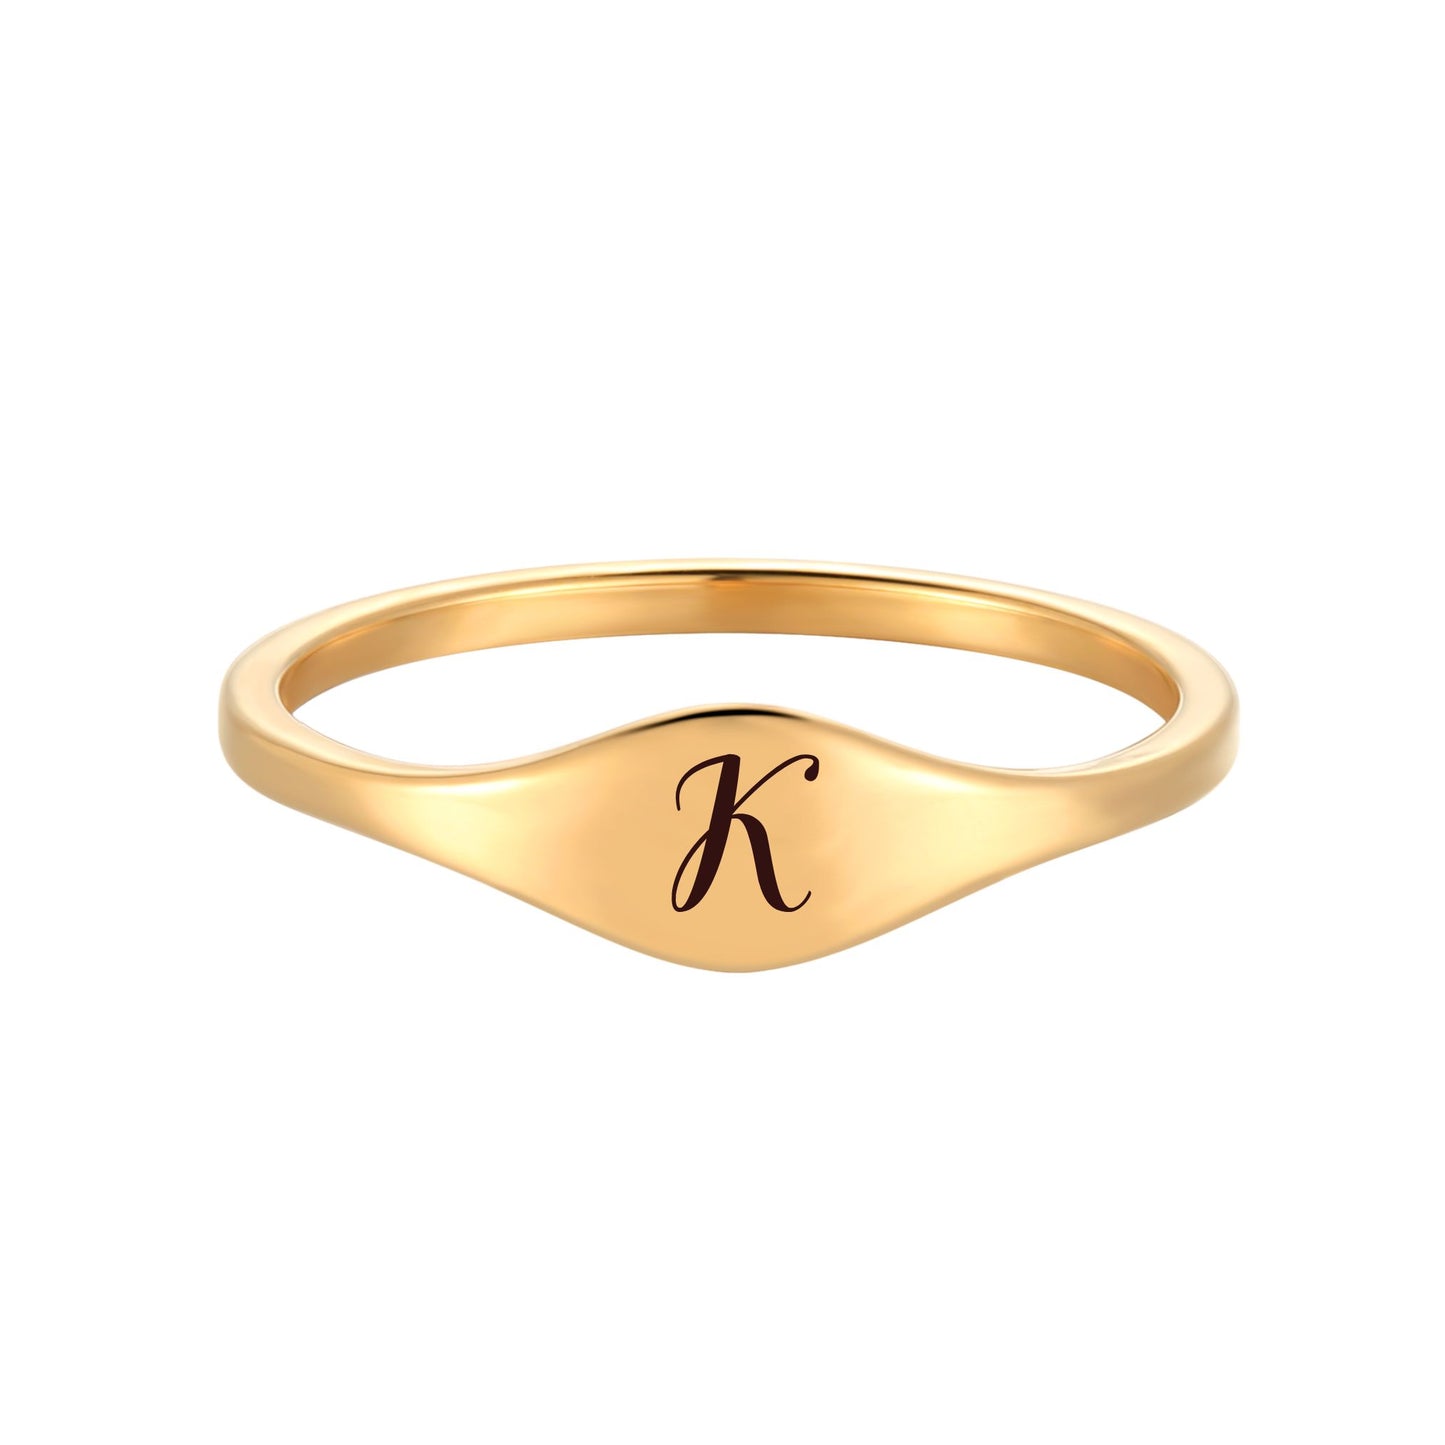 Personalized Letter Ring